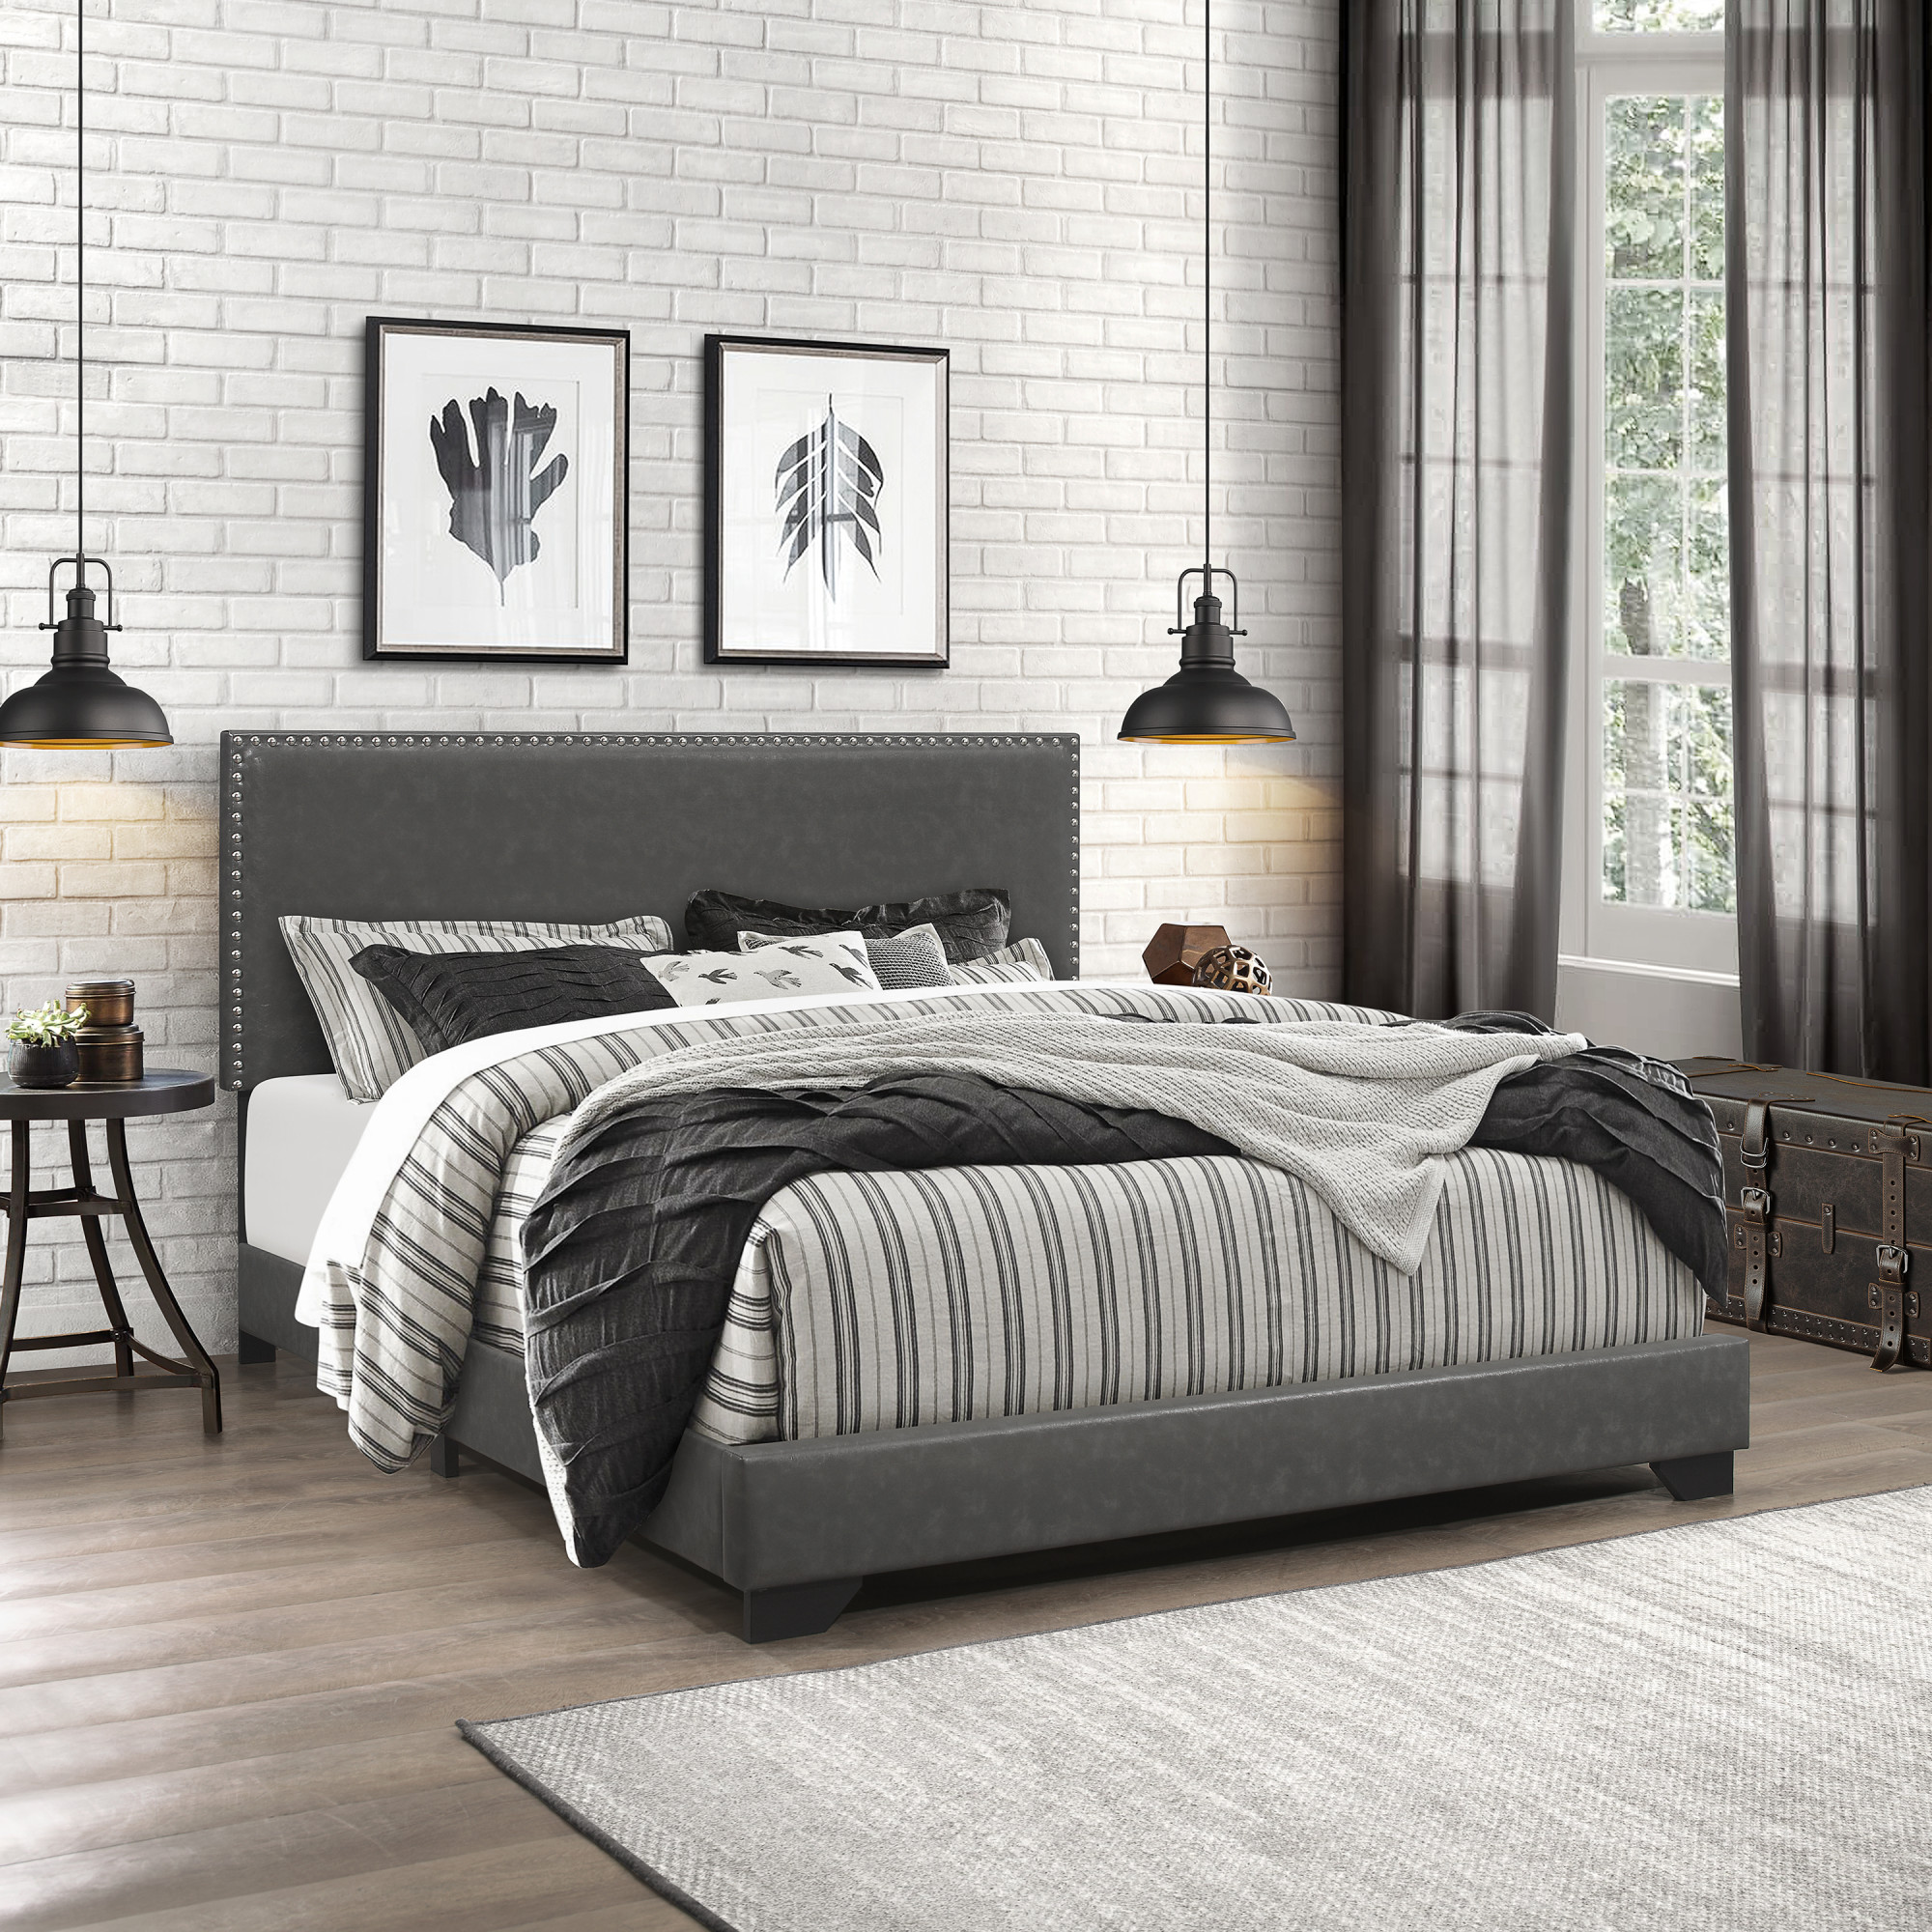 Willow Nailhead Trim Upholstered Queen Bed, Charcoal Faux Leather - image 1 of 16